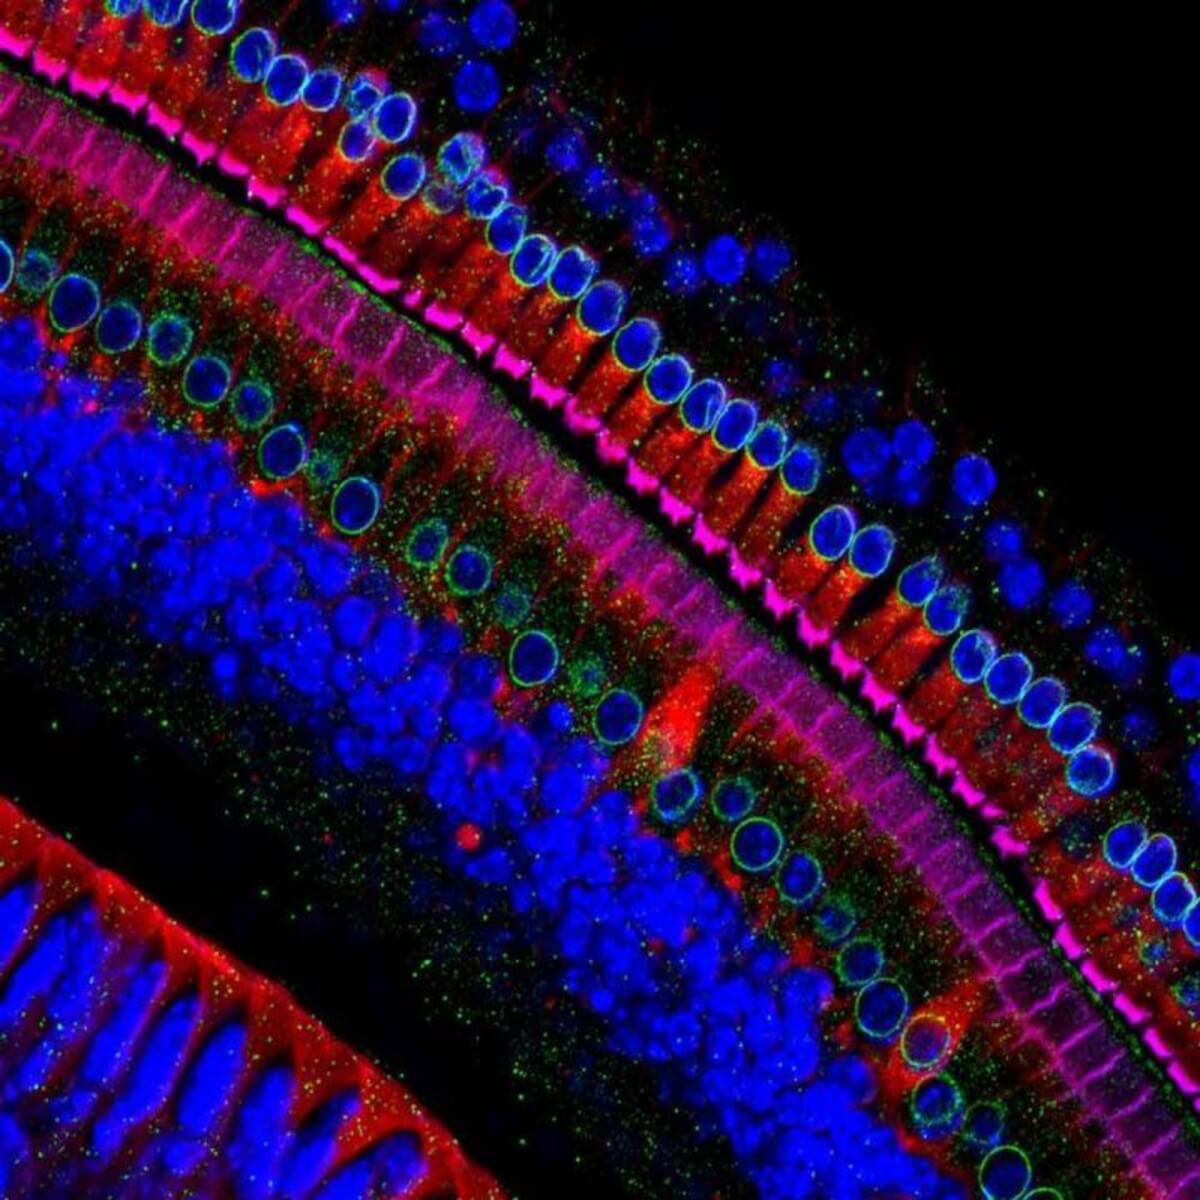 Hair cells are the sensory cells of the ear, named for their hair-like structures that bend in response to sound